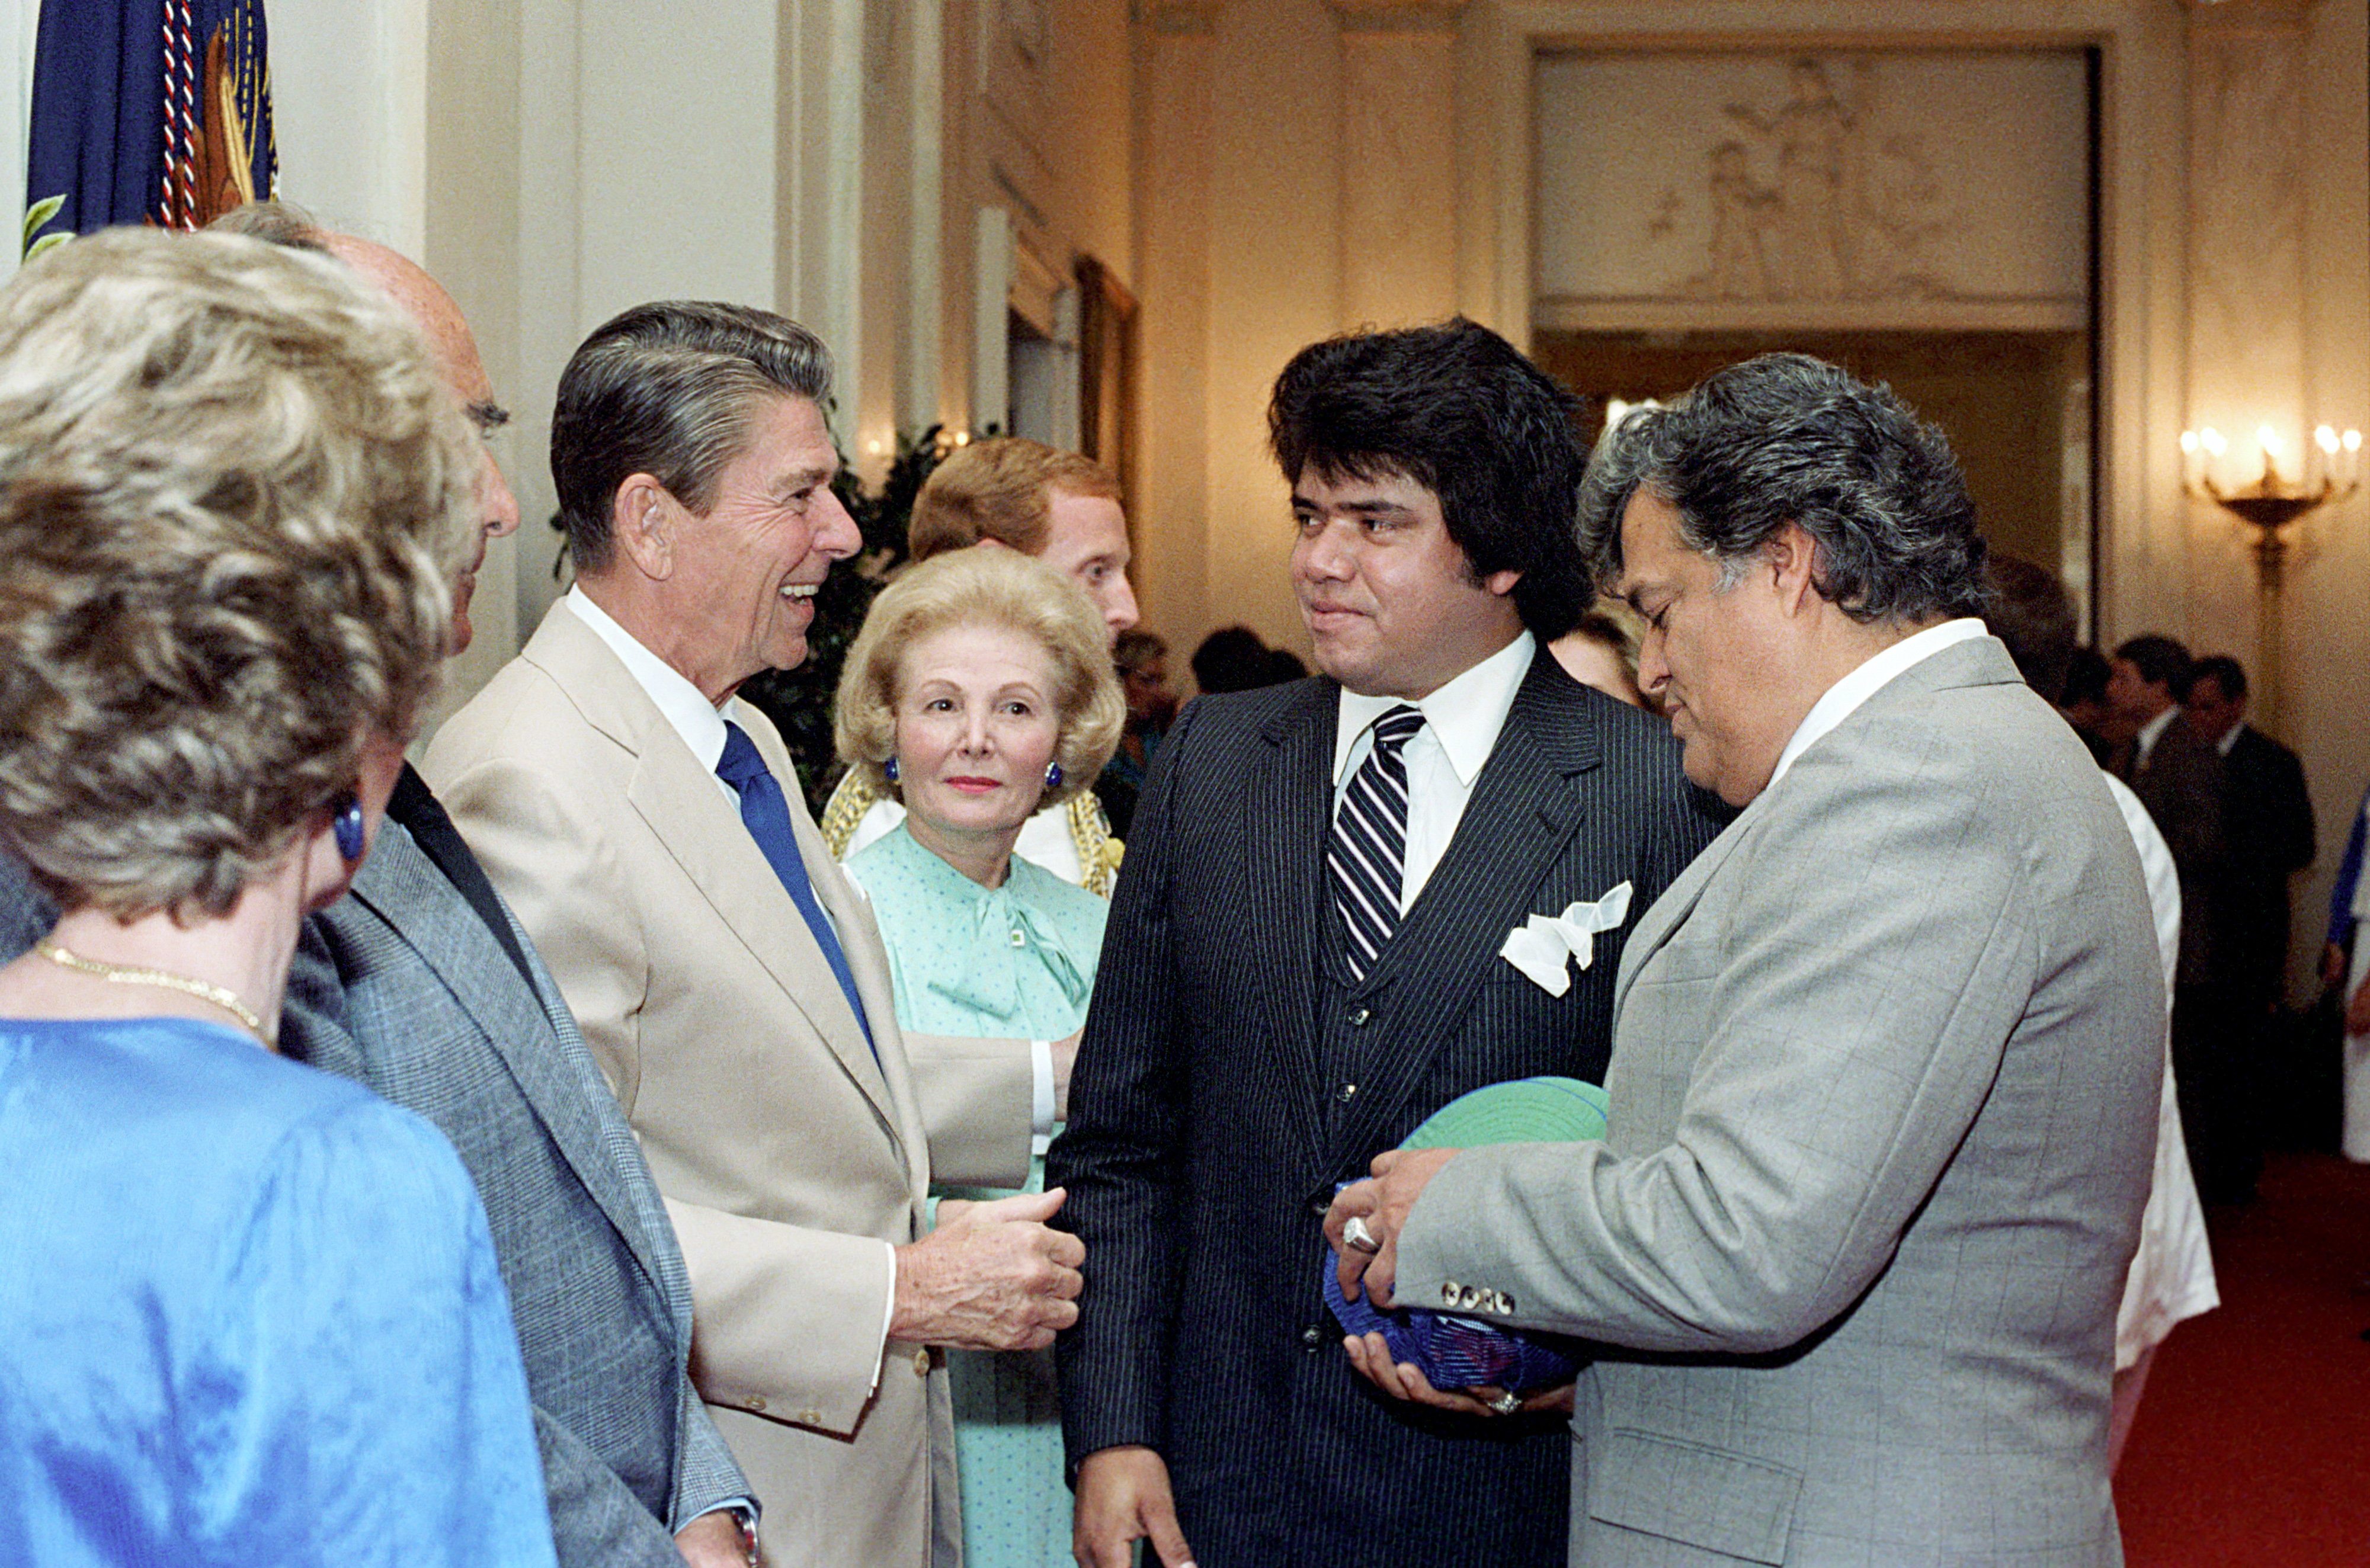 File:President Ronald Reagan shaking hands with Fernando Valenzuela and  Antonio DeMarco with Leonore Annenberg in the background.jpg - Wikimedia  Commons